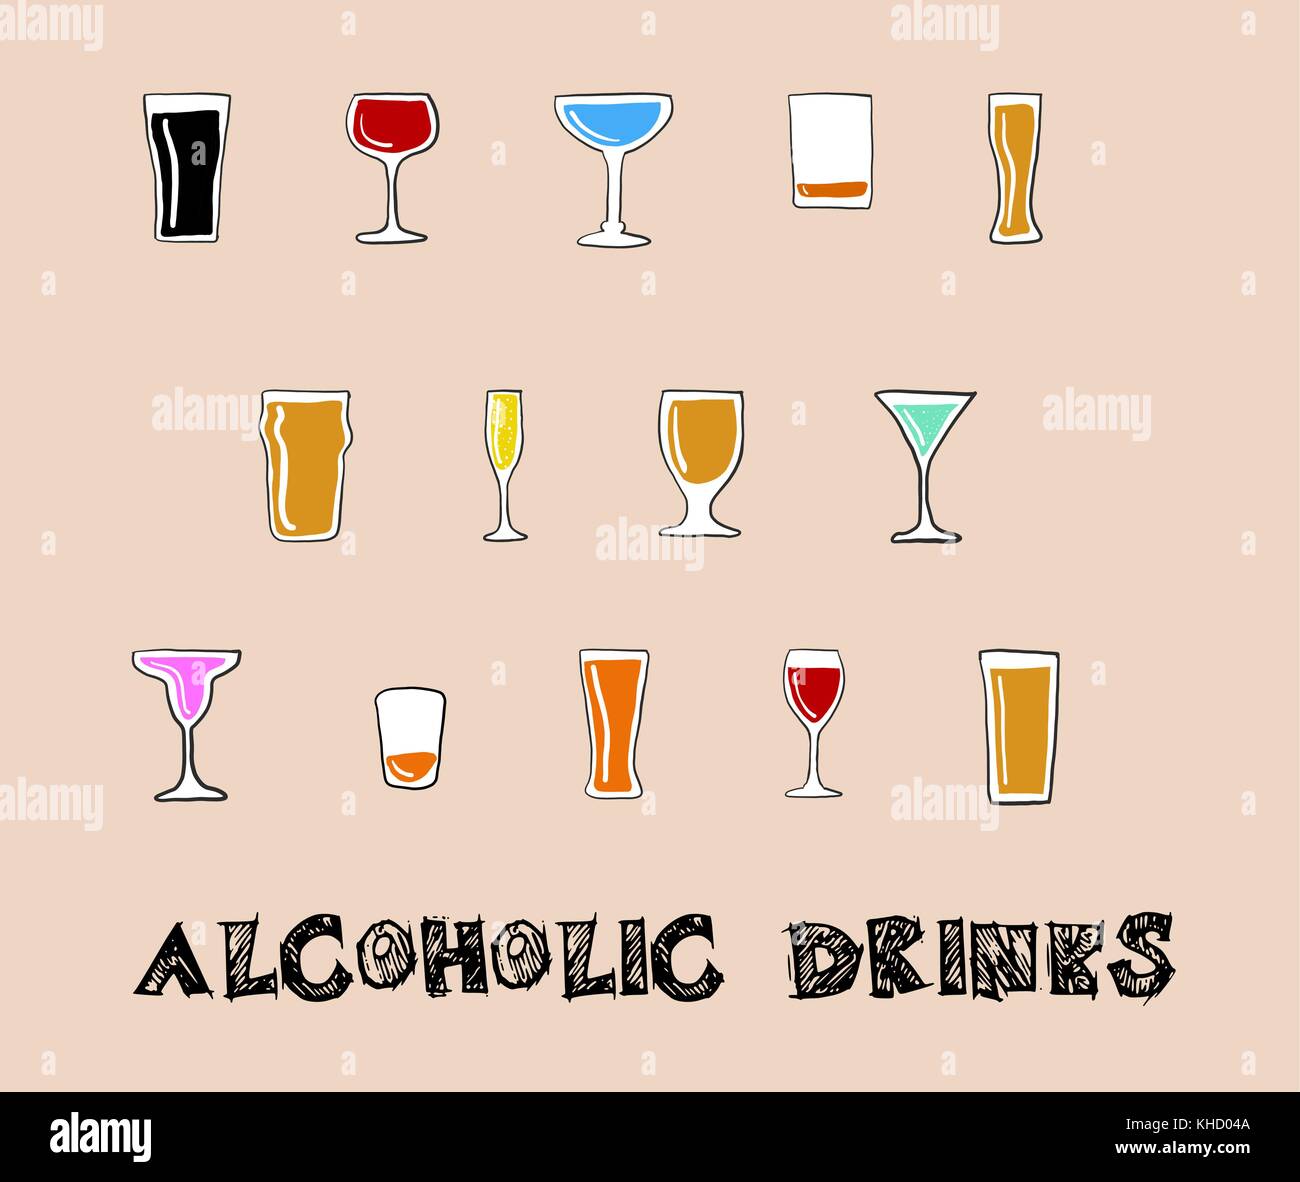 Types of Glasses for Alcohol